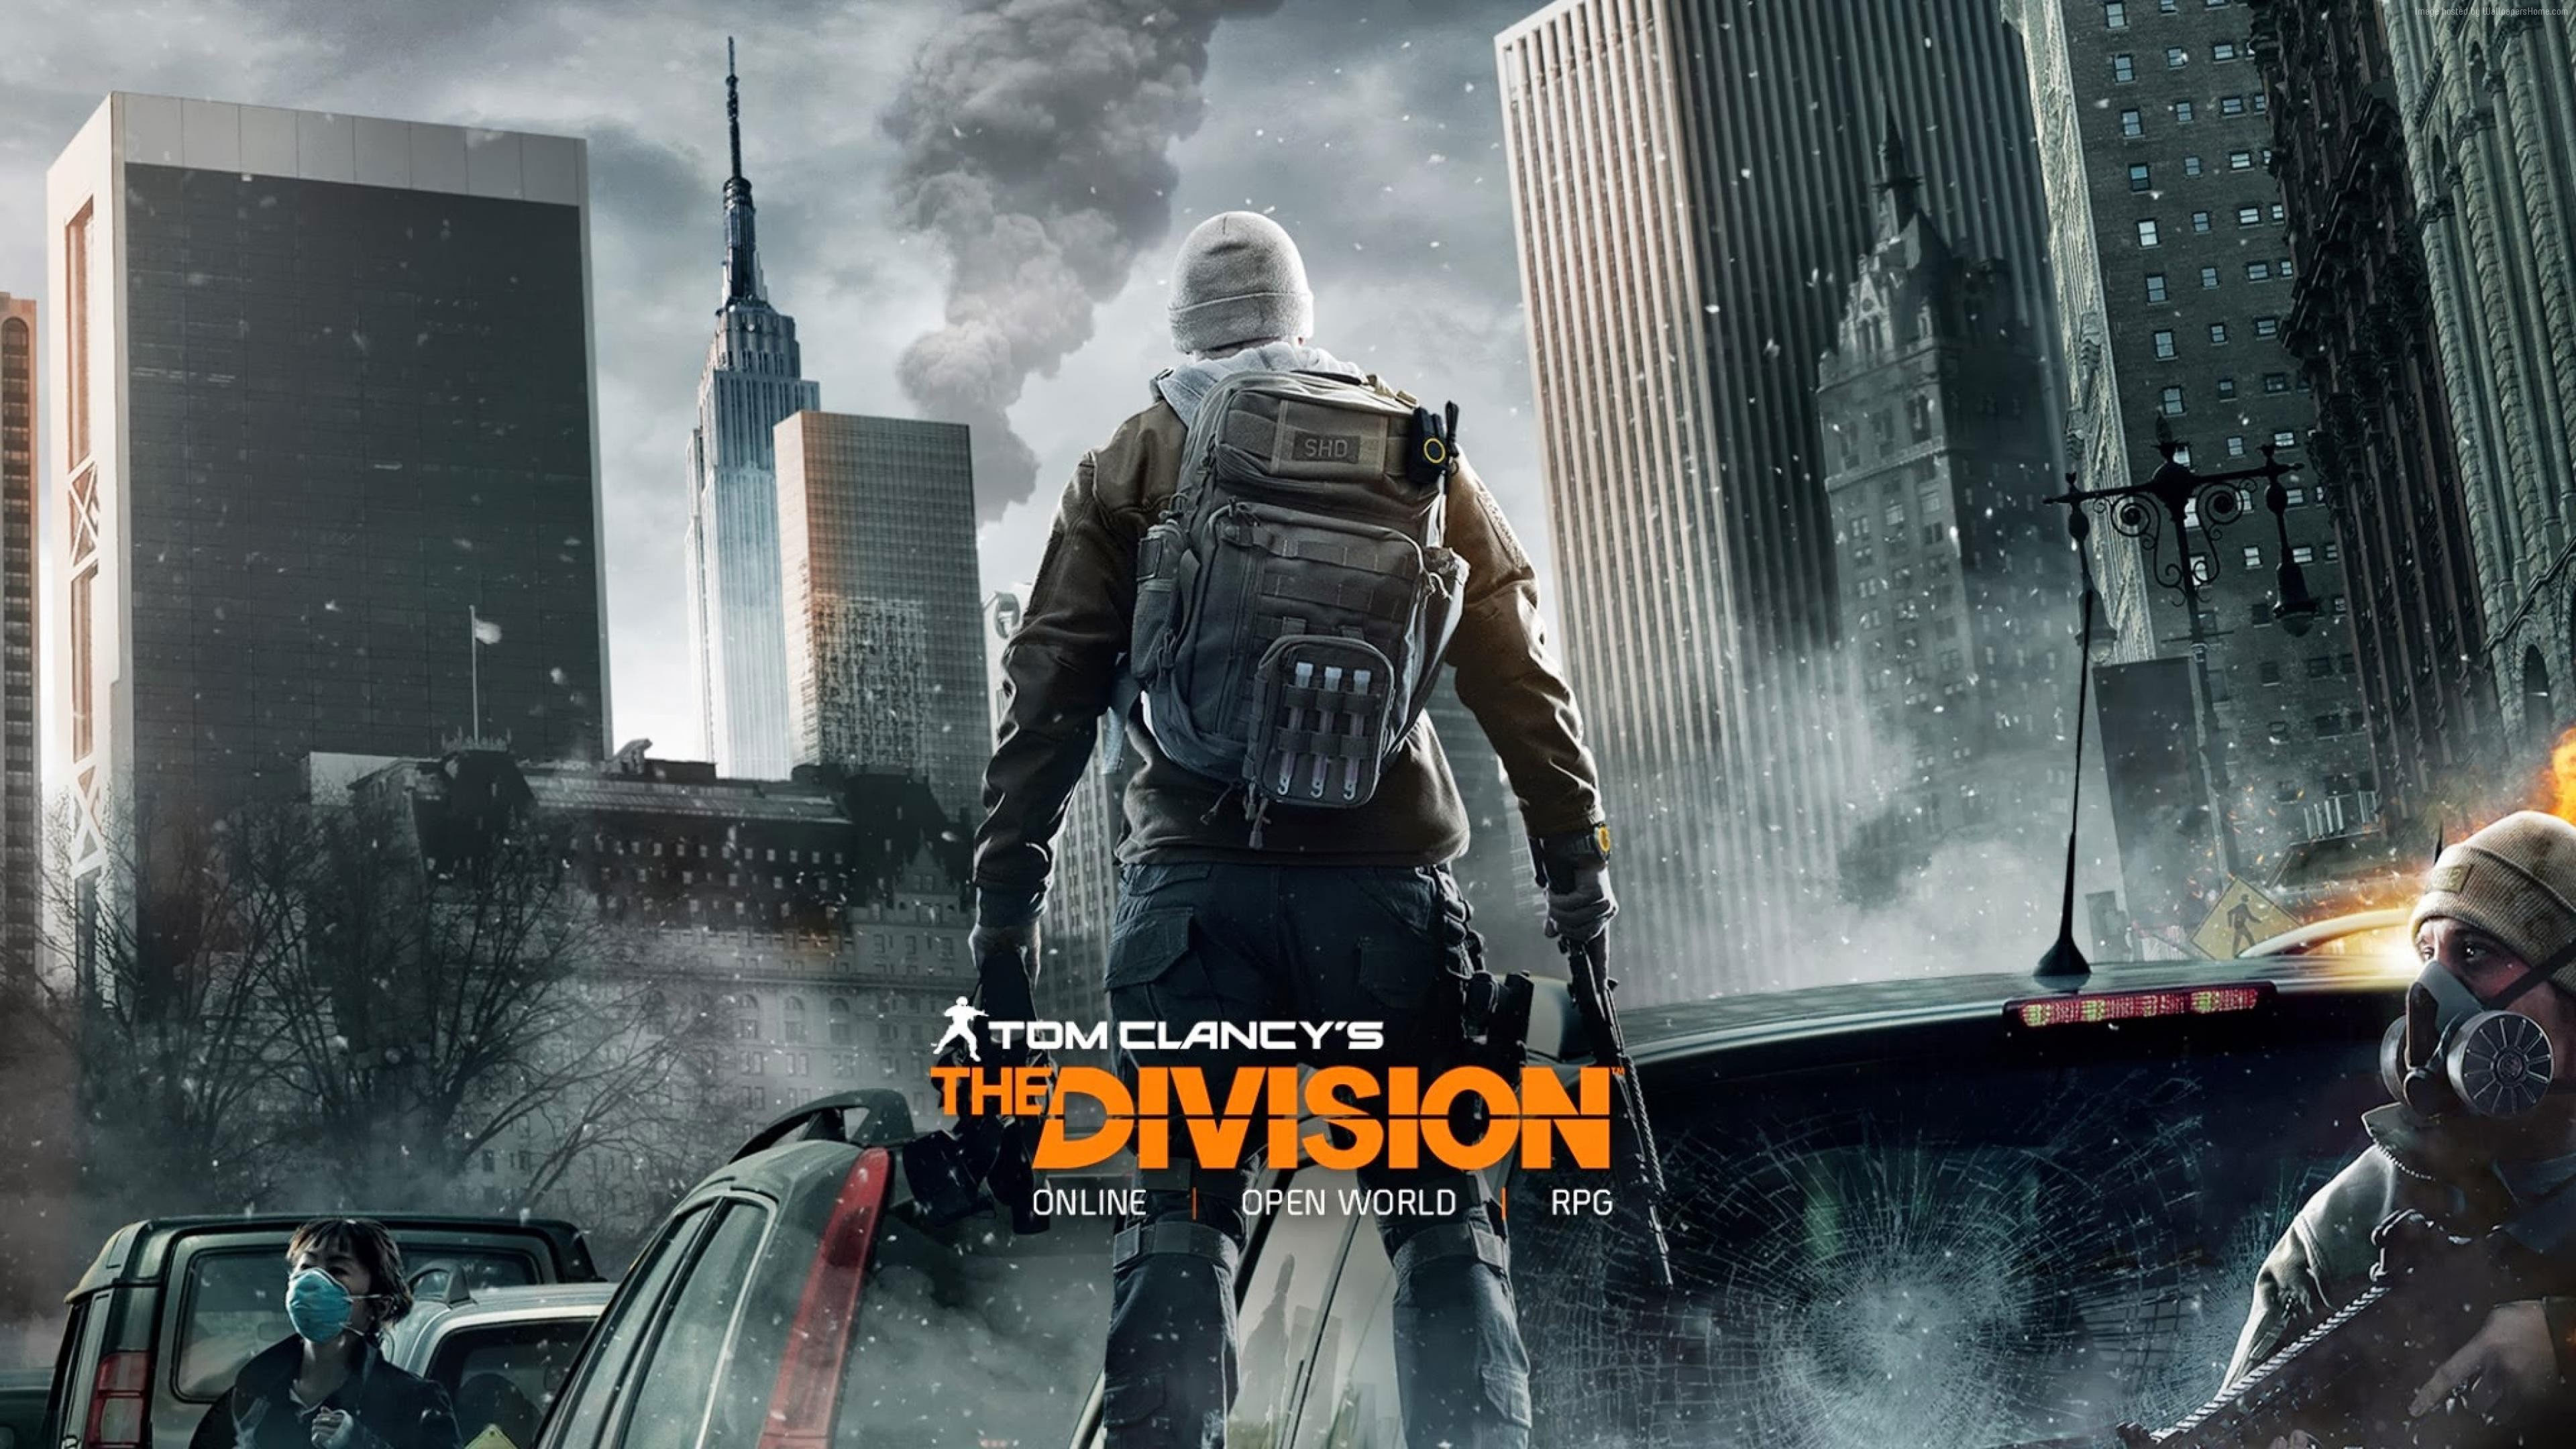 3840x2160 The Division 4K Wallpaper ...